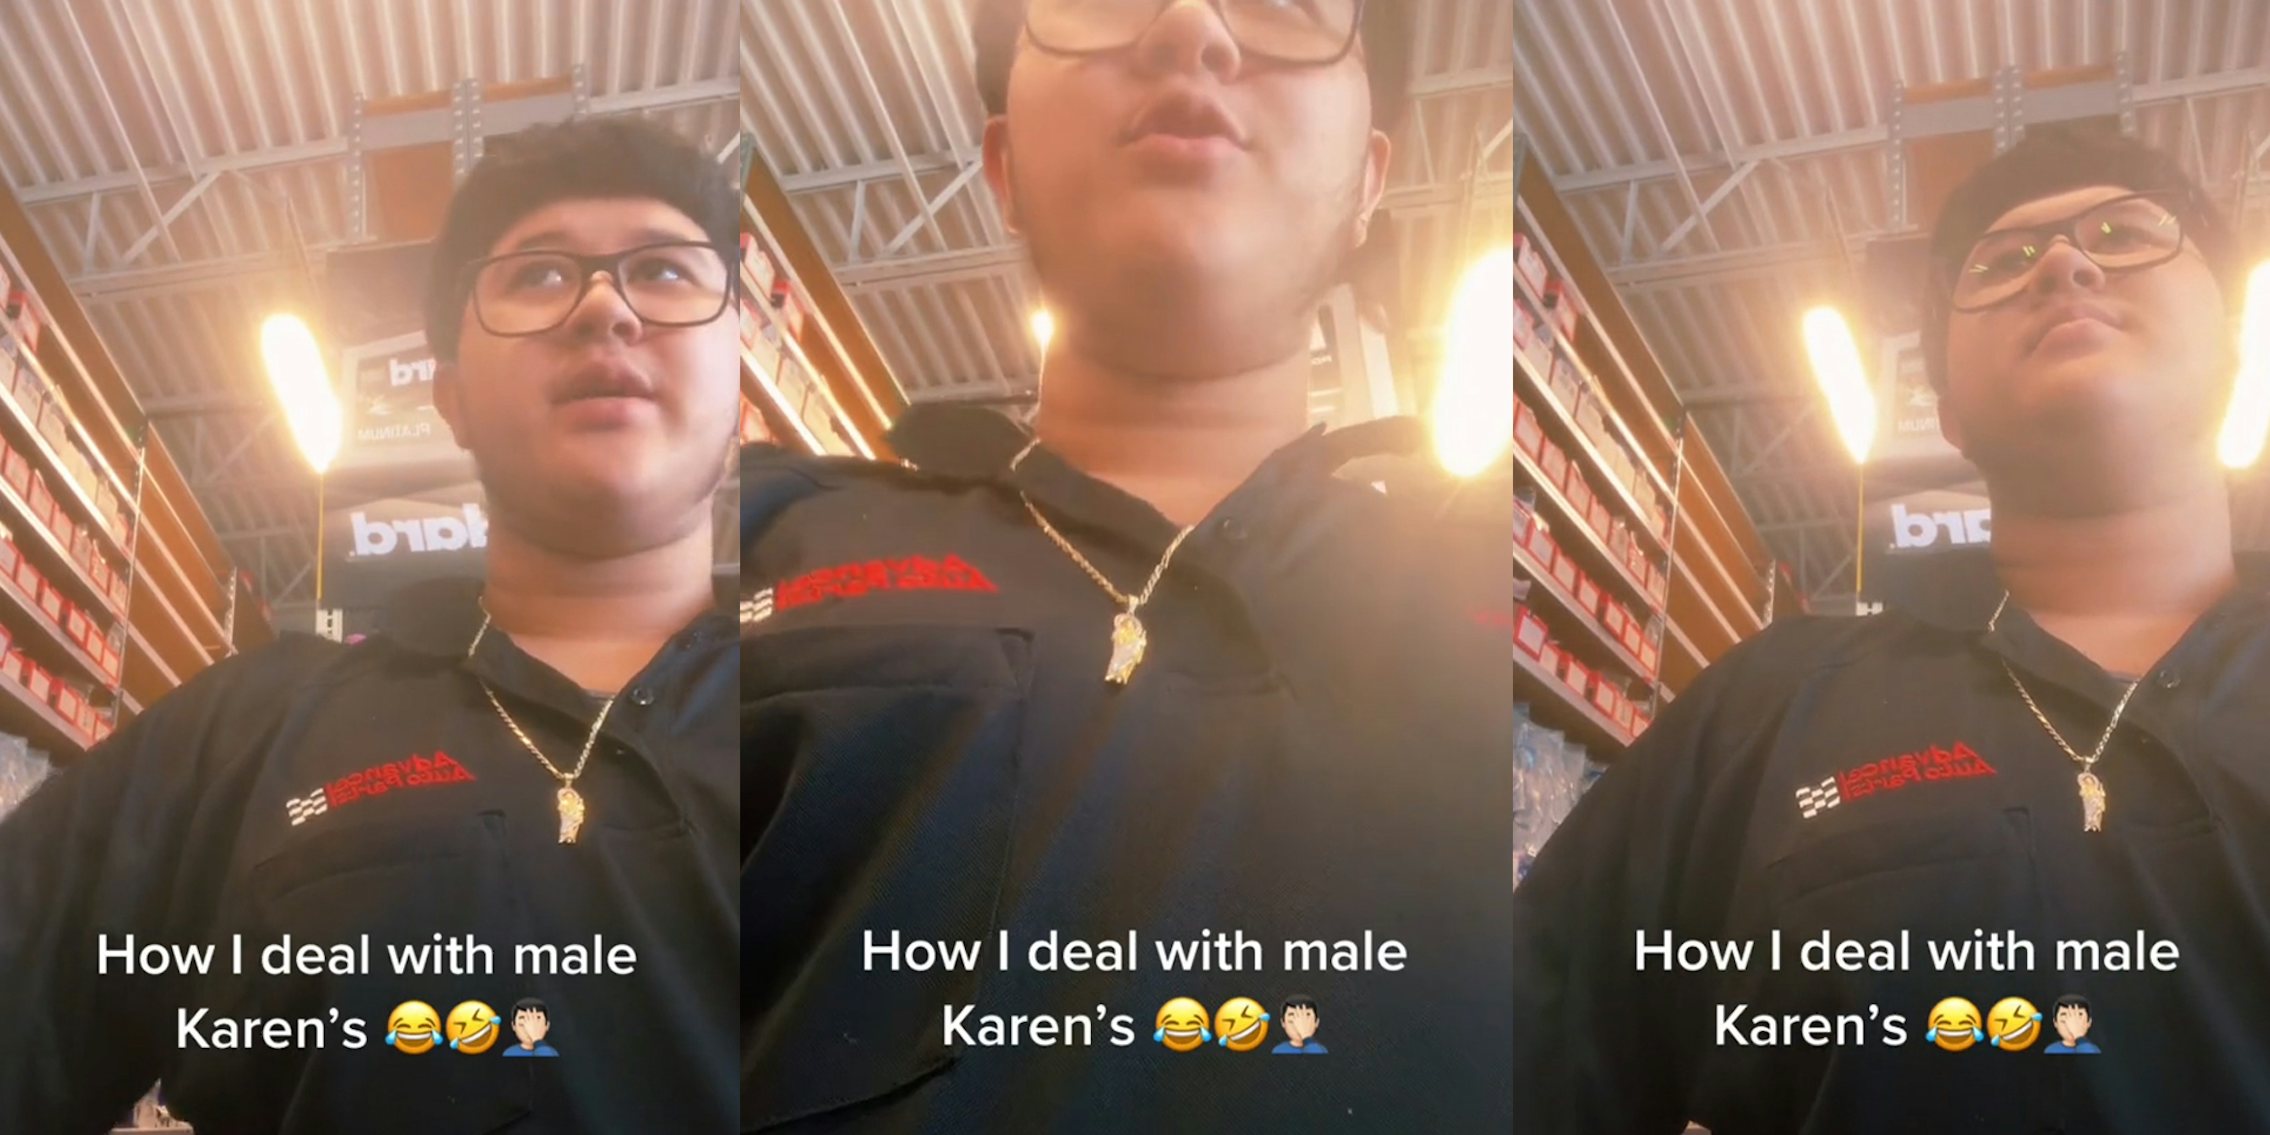 Auto store worker in store speaking to customer caption 'How I deal with male Karen's' (l) Auto store worker in store speaking to customer caption 'How I deal with male Karen's' (c) Auto store worker in store speaking to customer caption 'How I deal with male Karen's' (r)